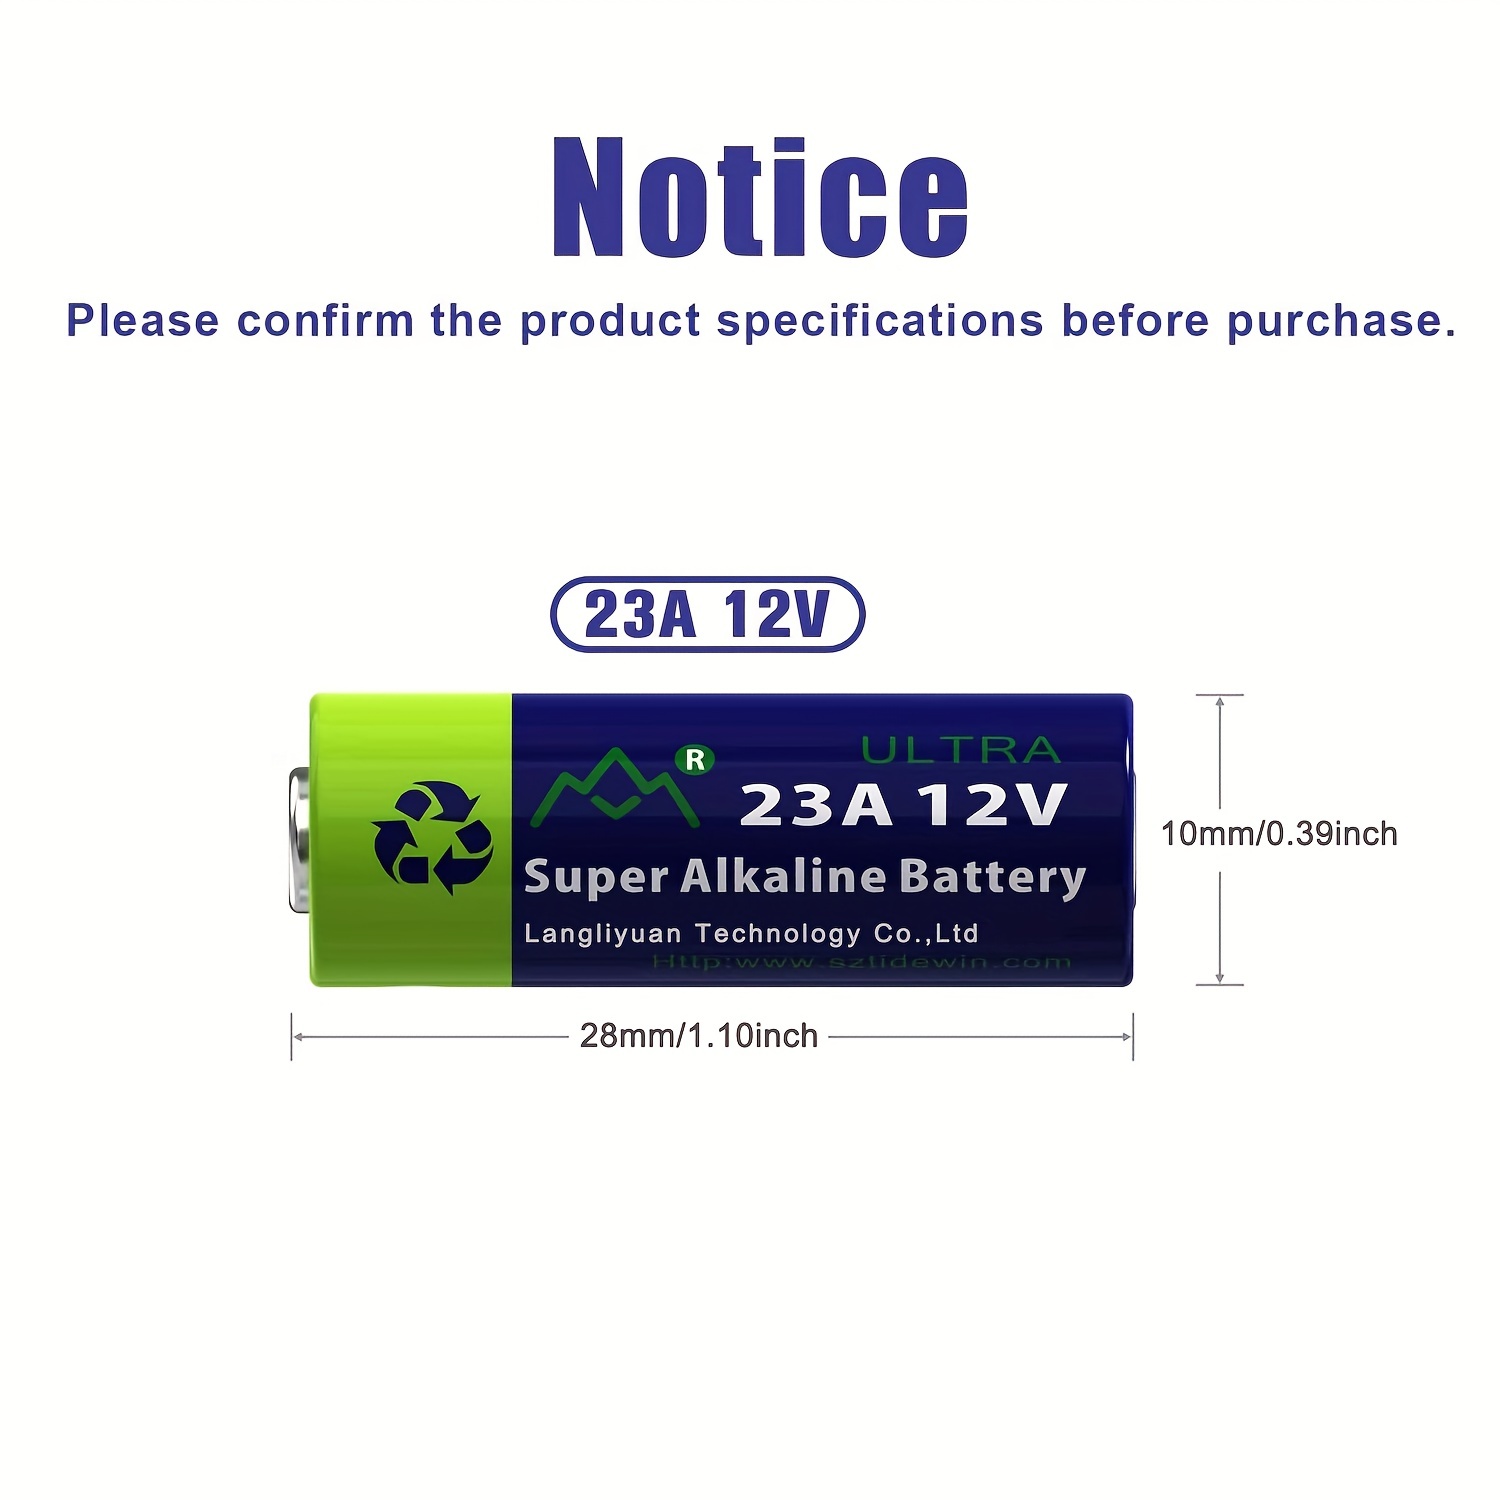 Exell EB-23A Alkaline 12V Battery Replaces MN21 L1028 LRV08 8LR932